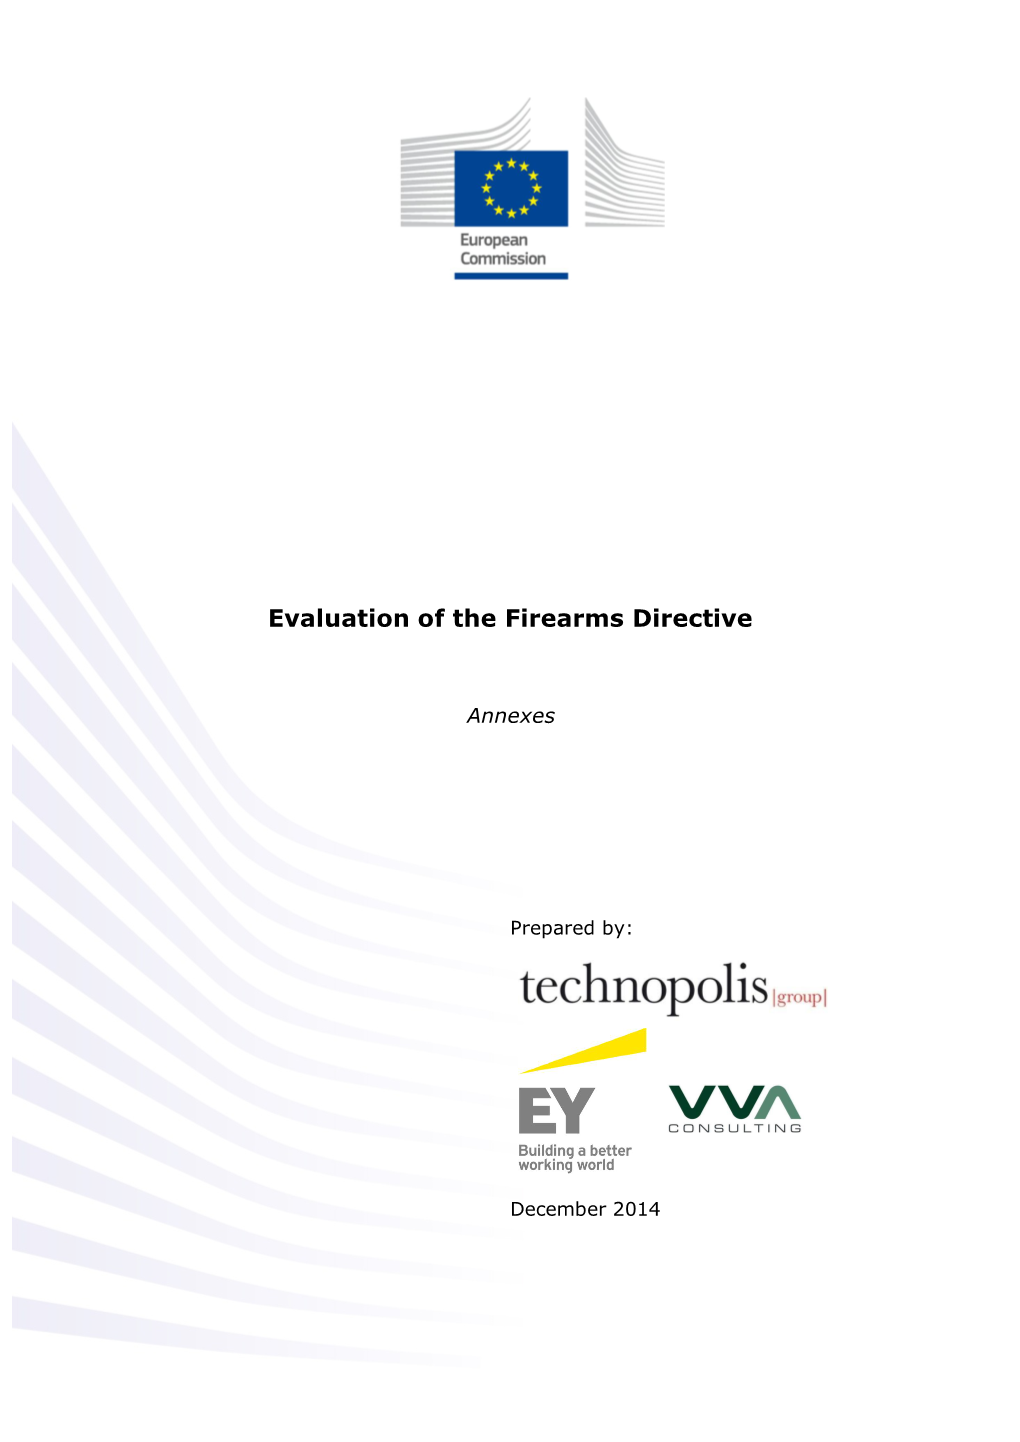 Study on the Evaluation of the Firearms Directive